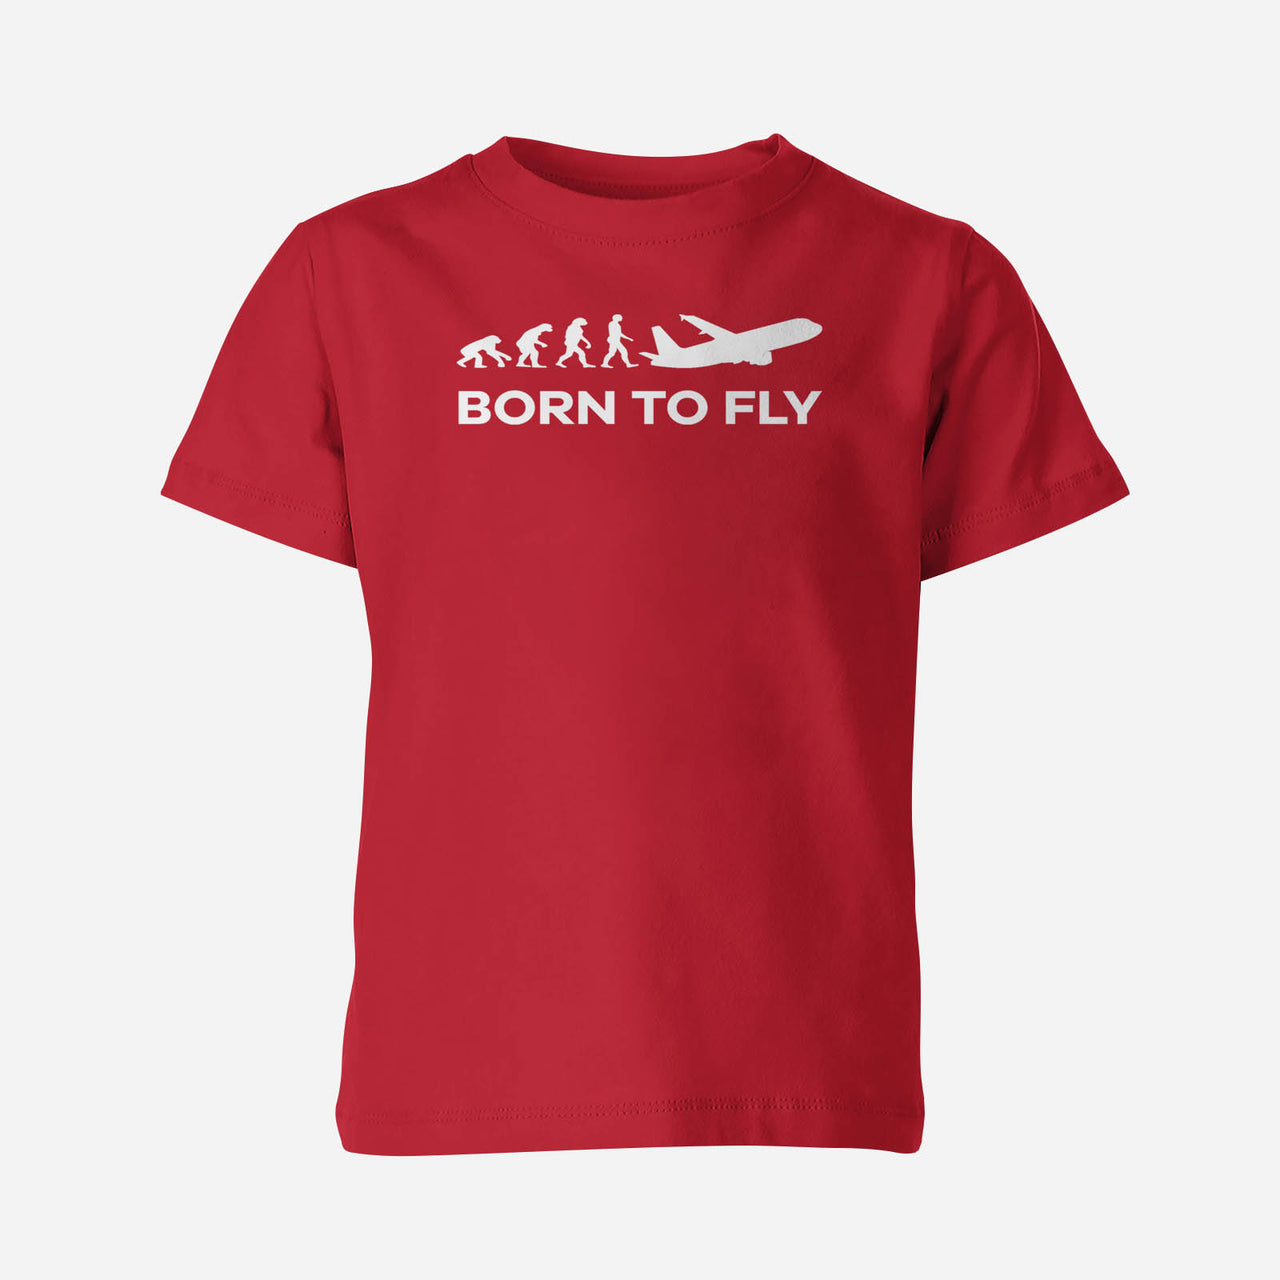 Born To Fly Designed Children T-Shirts